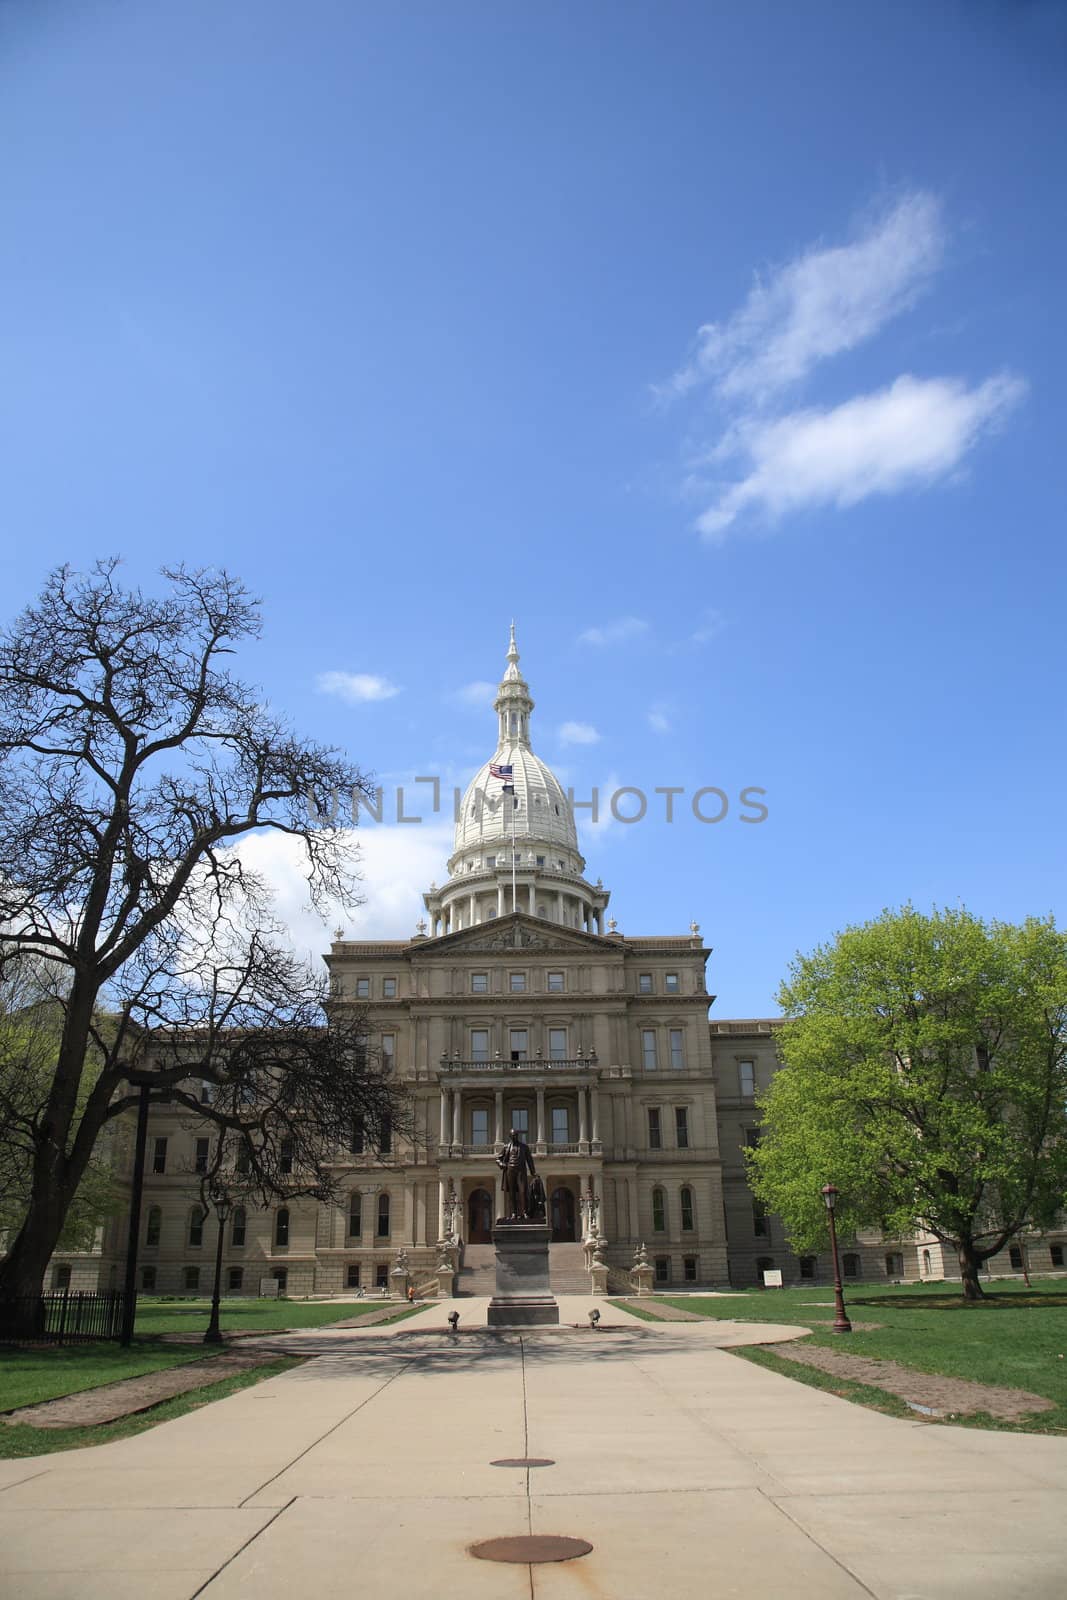 Michigan State Capitol Building by Ffooter